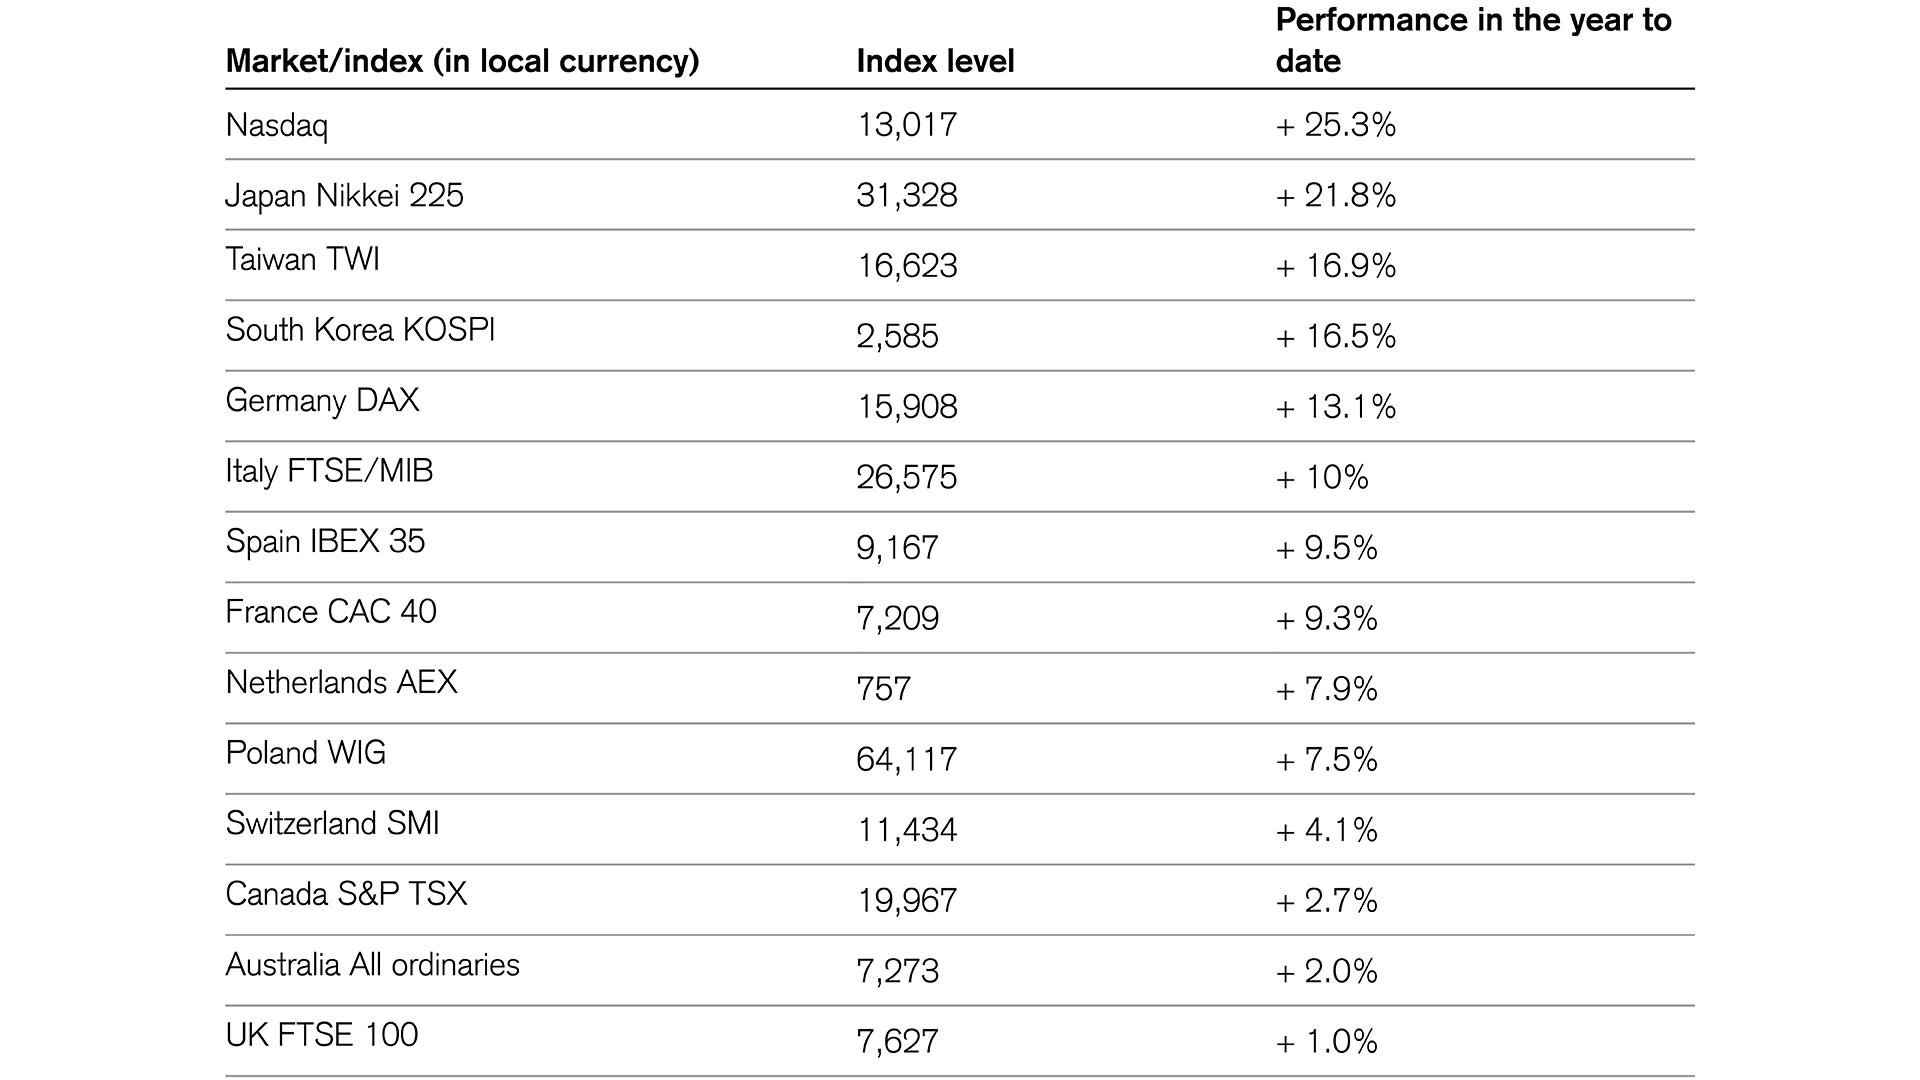 Performance of the most important developed market indices